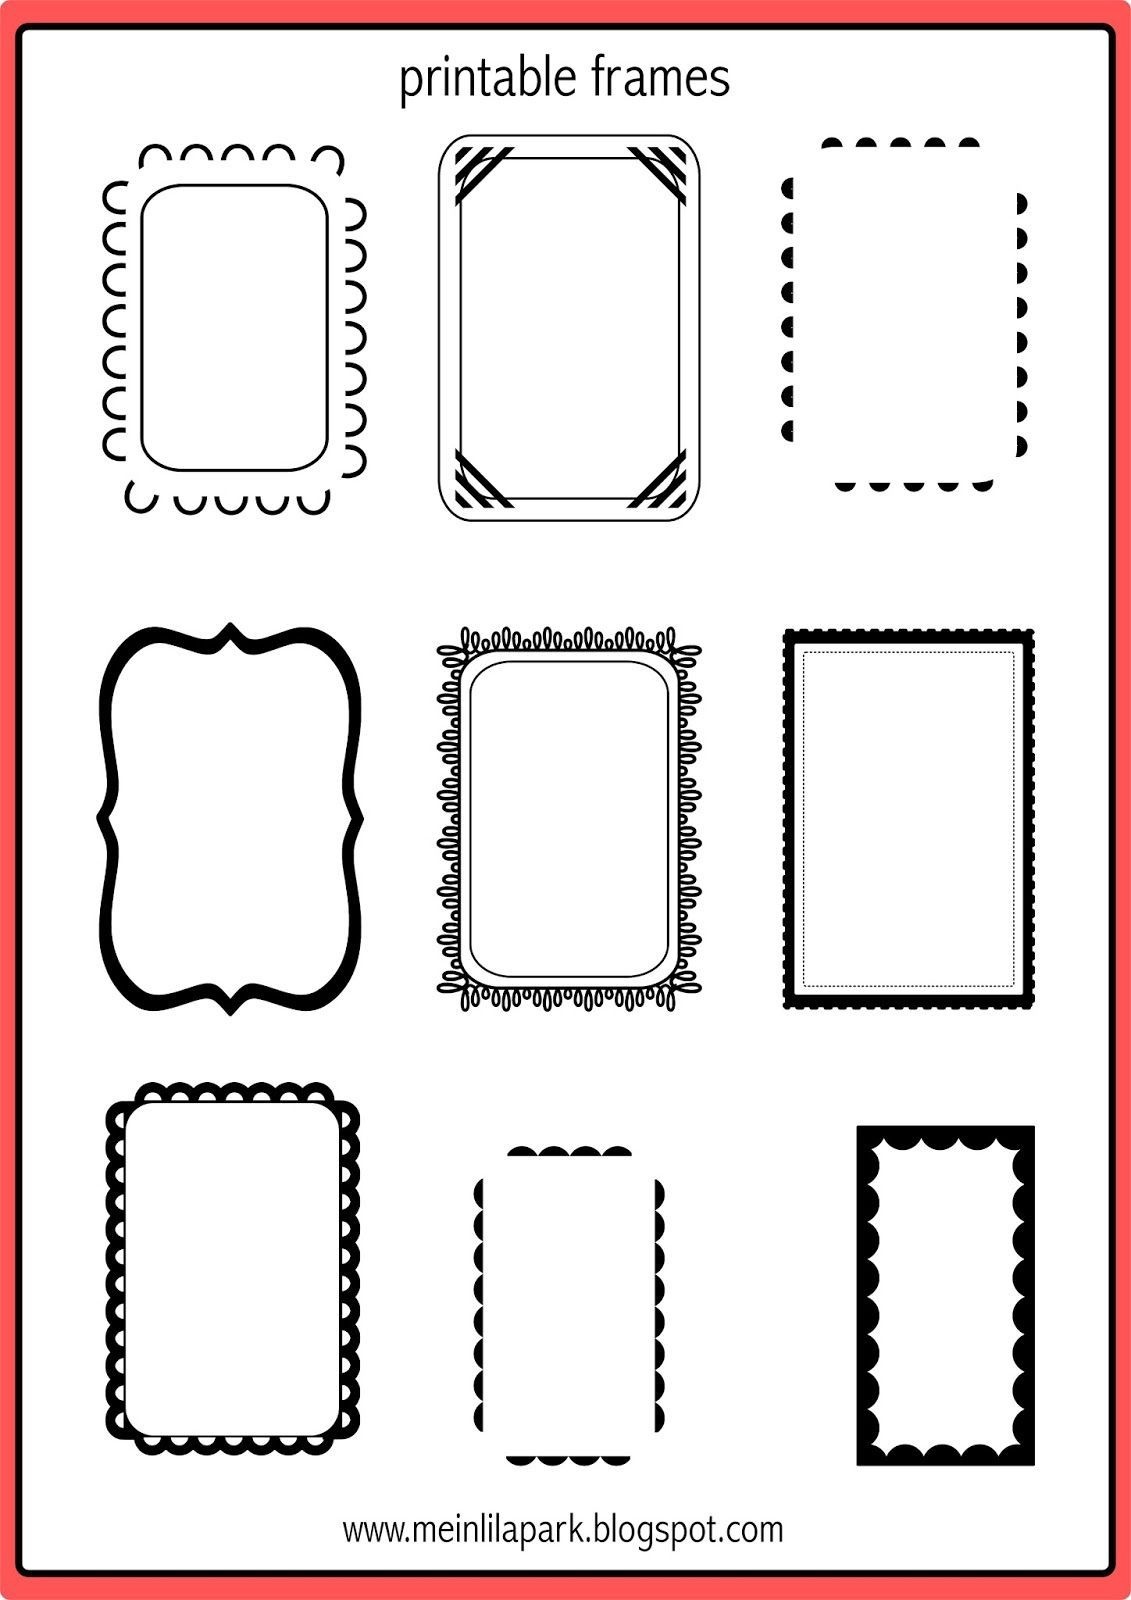 35+ Inspiration Picture Of Scrapbooking Frames Printable - Free Printable Frames For Scrapbooking